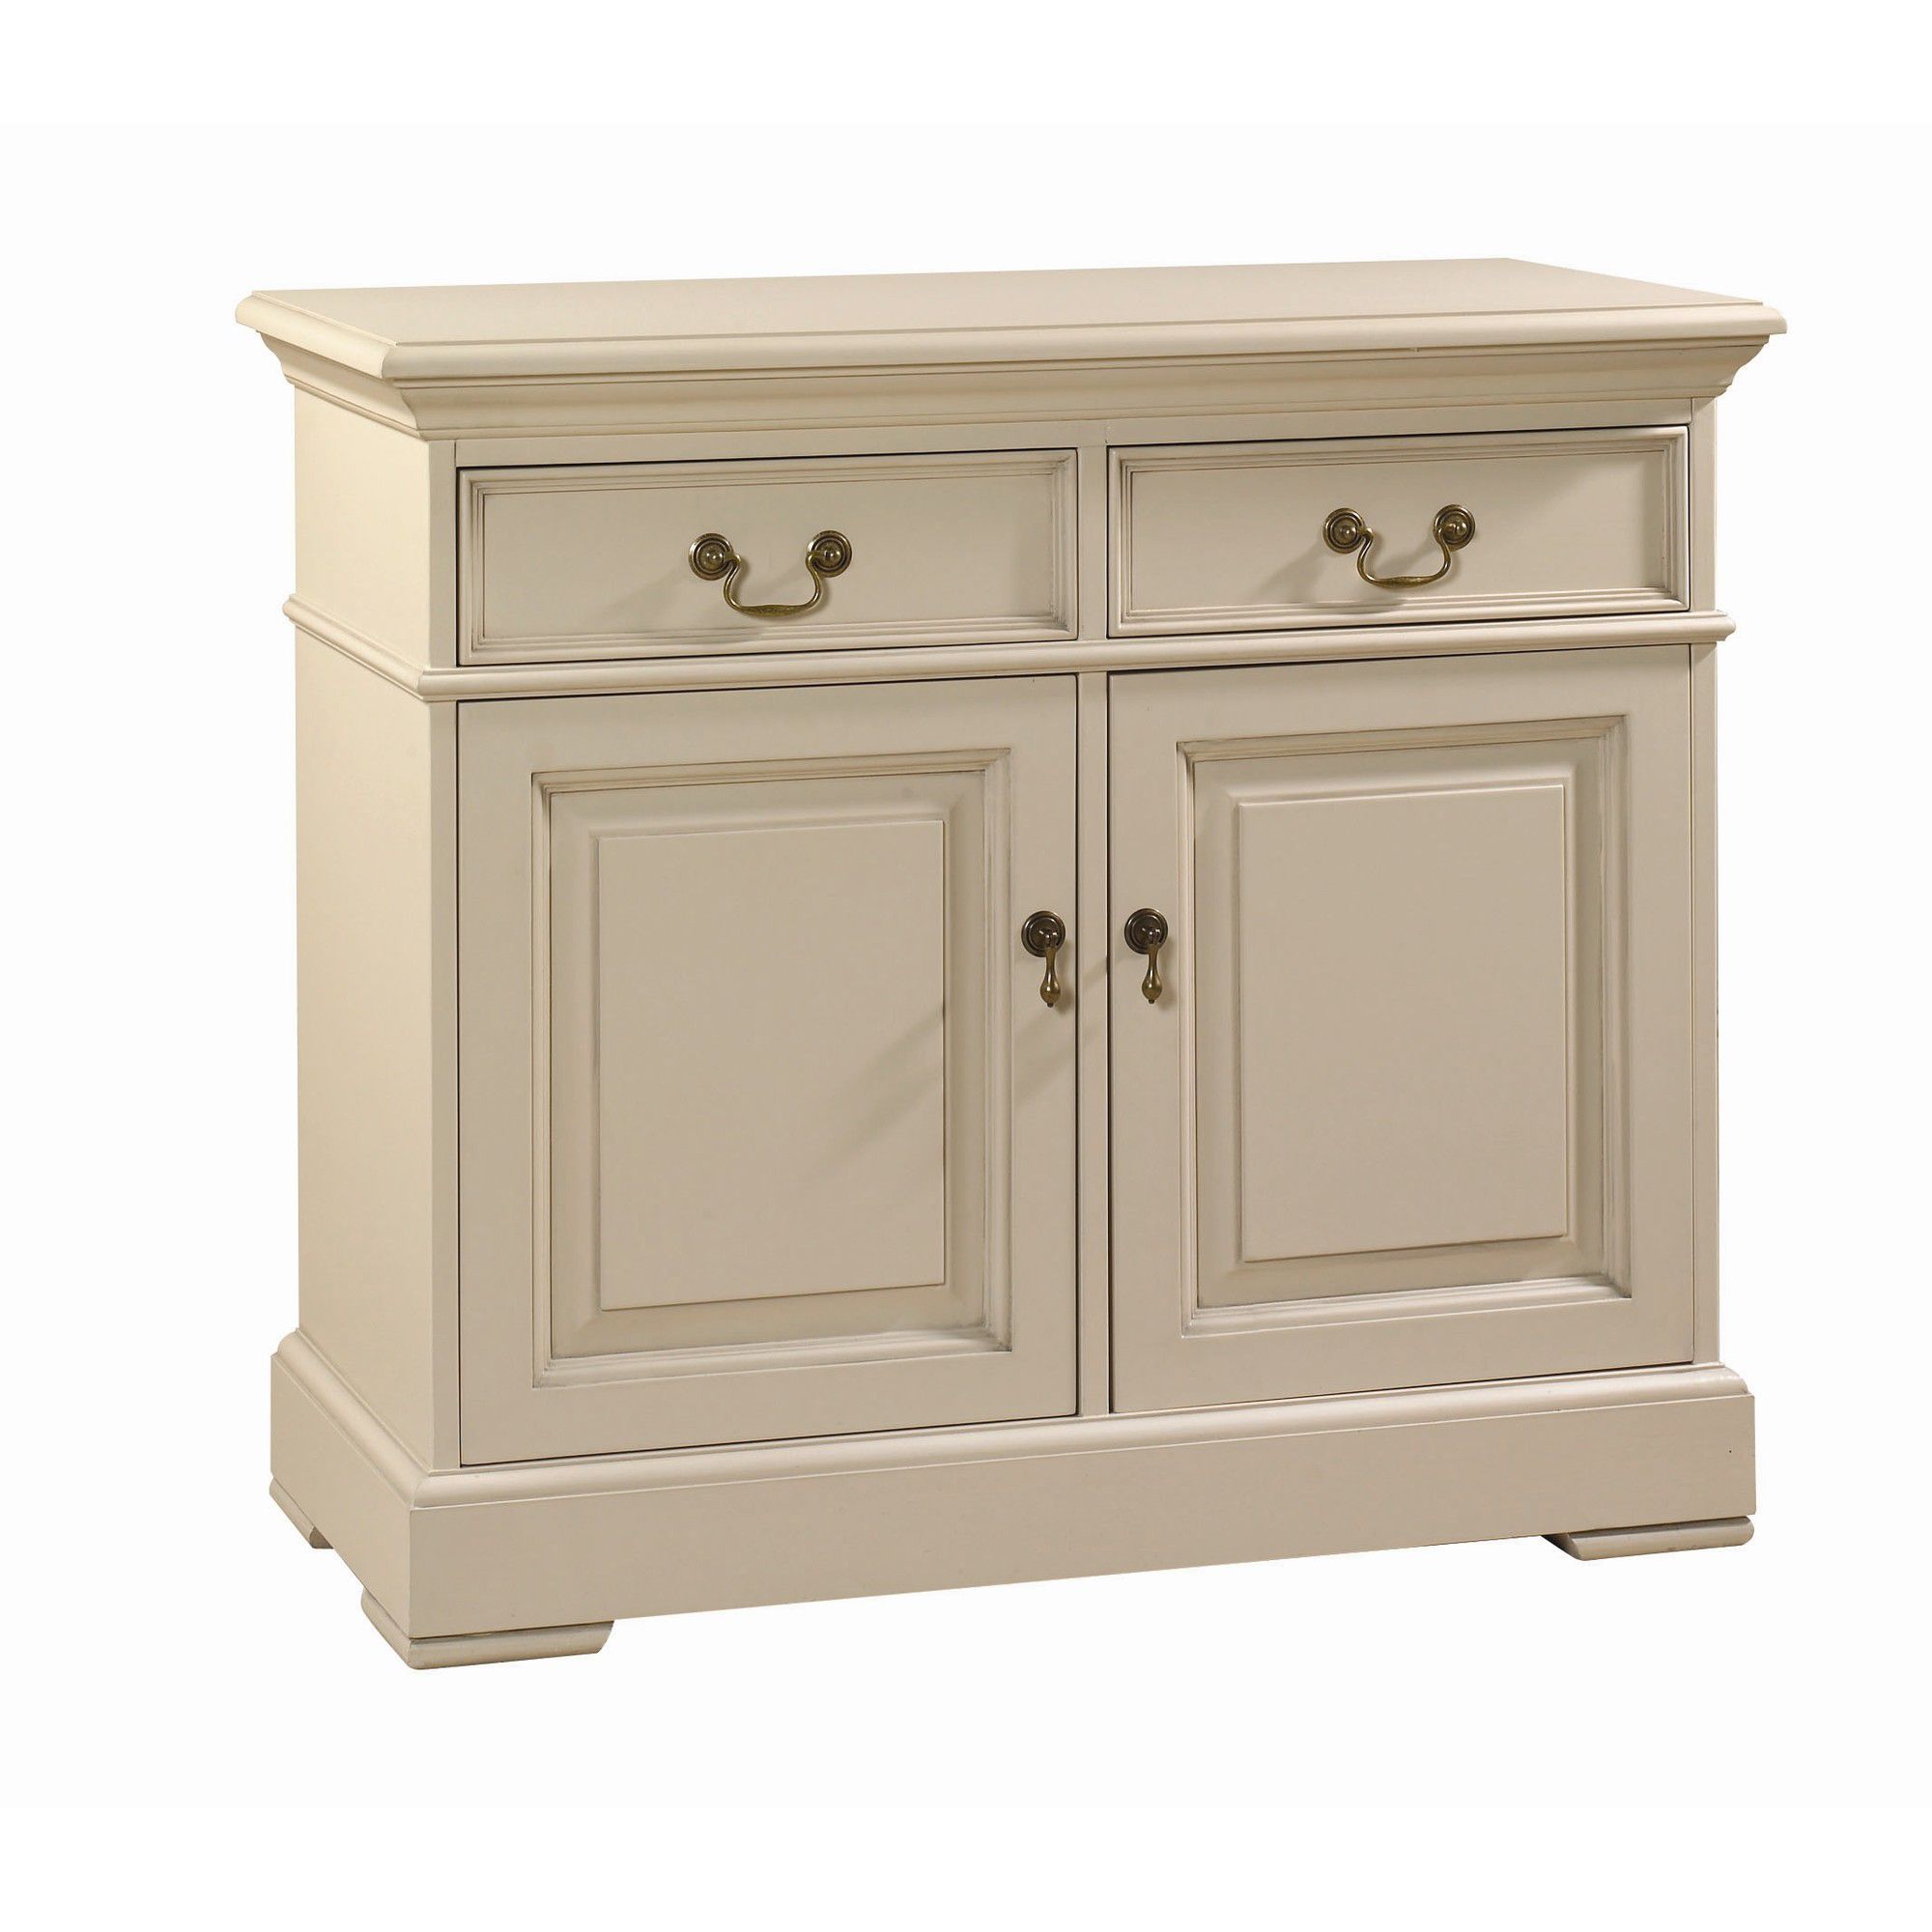 YP Furniture Country House Two Door Sideboard - Ivory at Tescos Direct